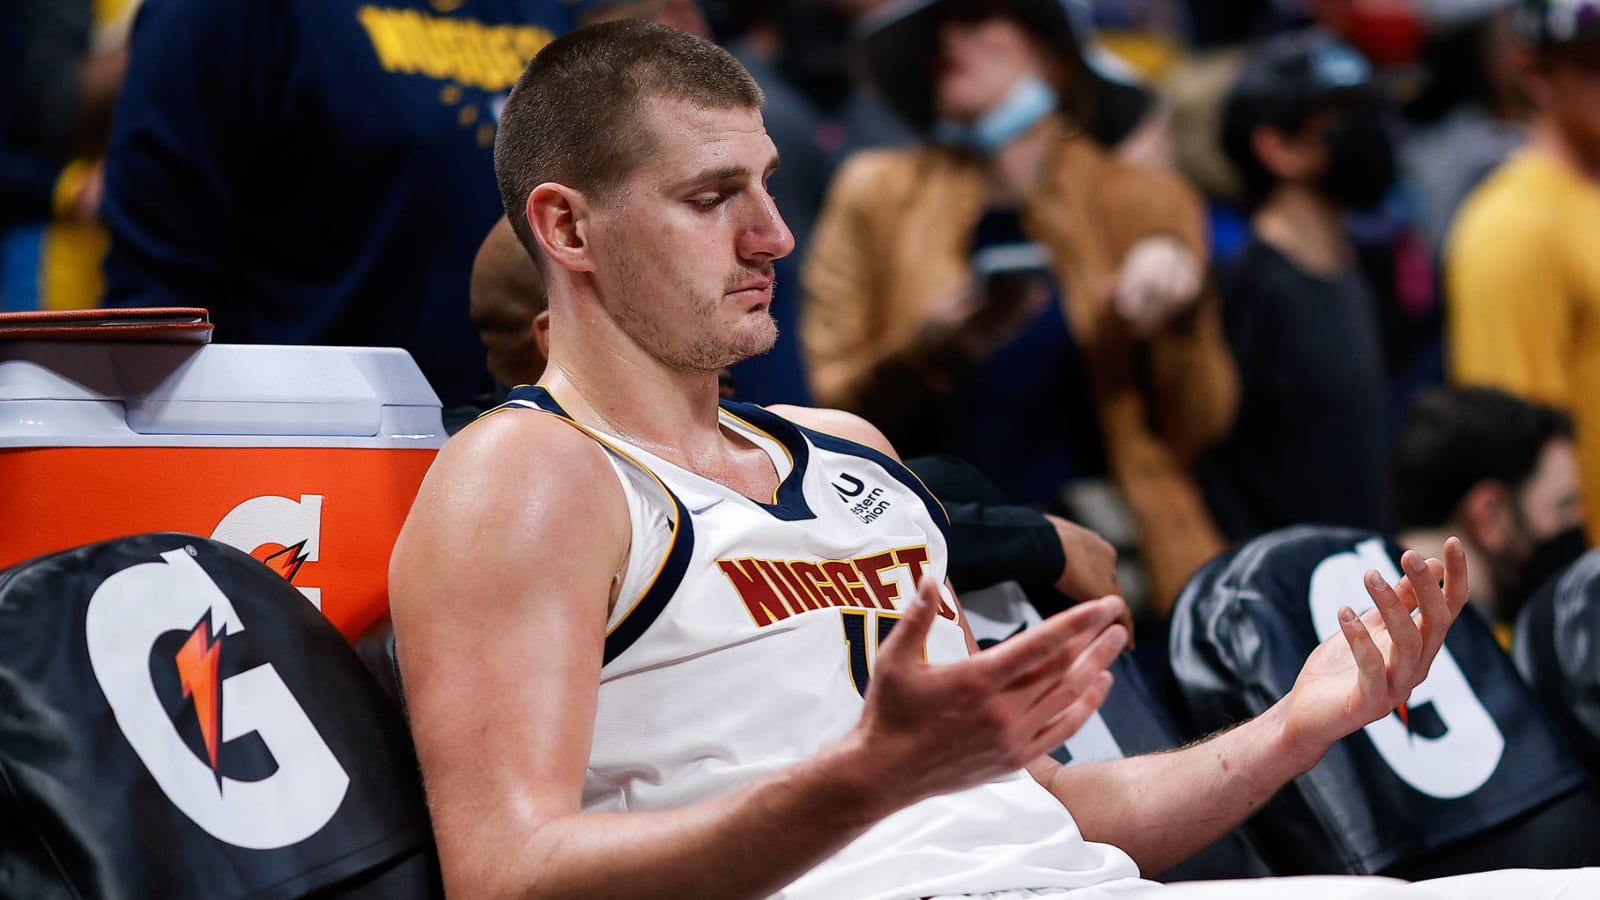 Nuggets' Jokic faces suspension over incident with Heat's Morris